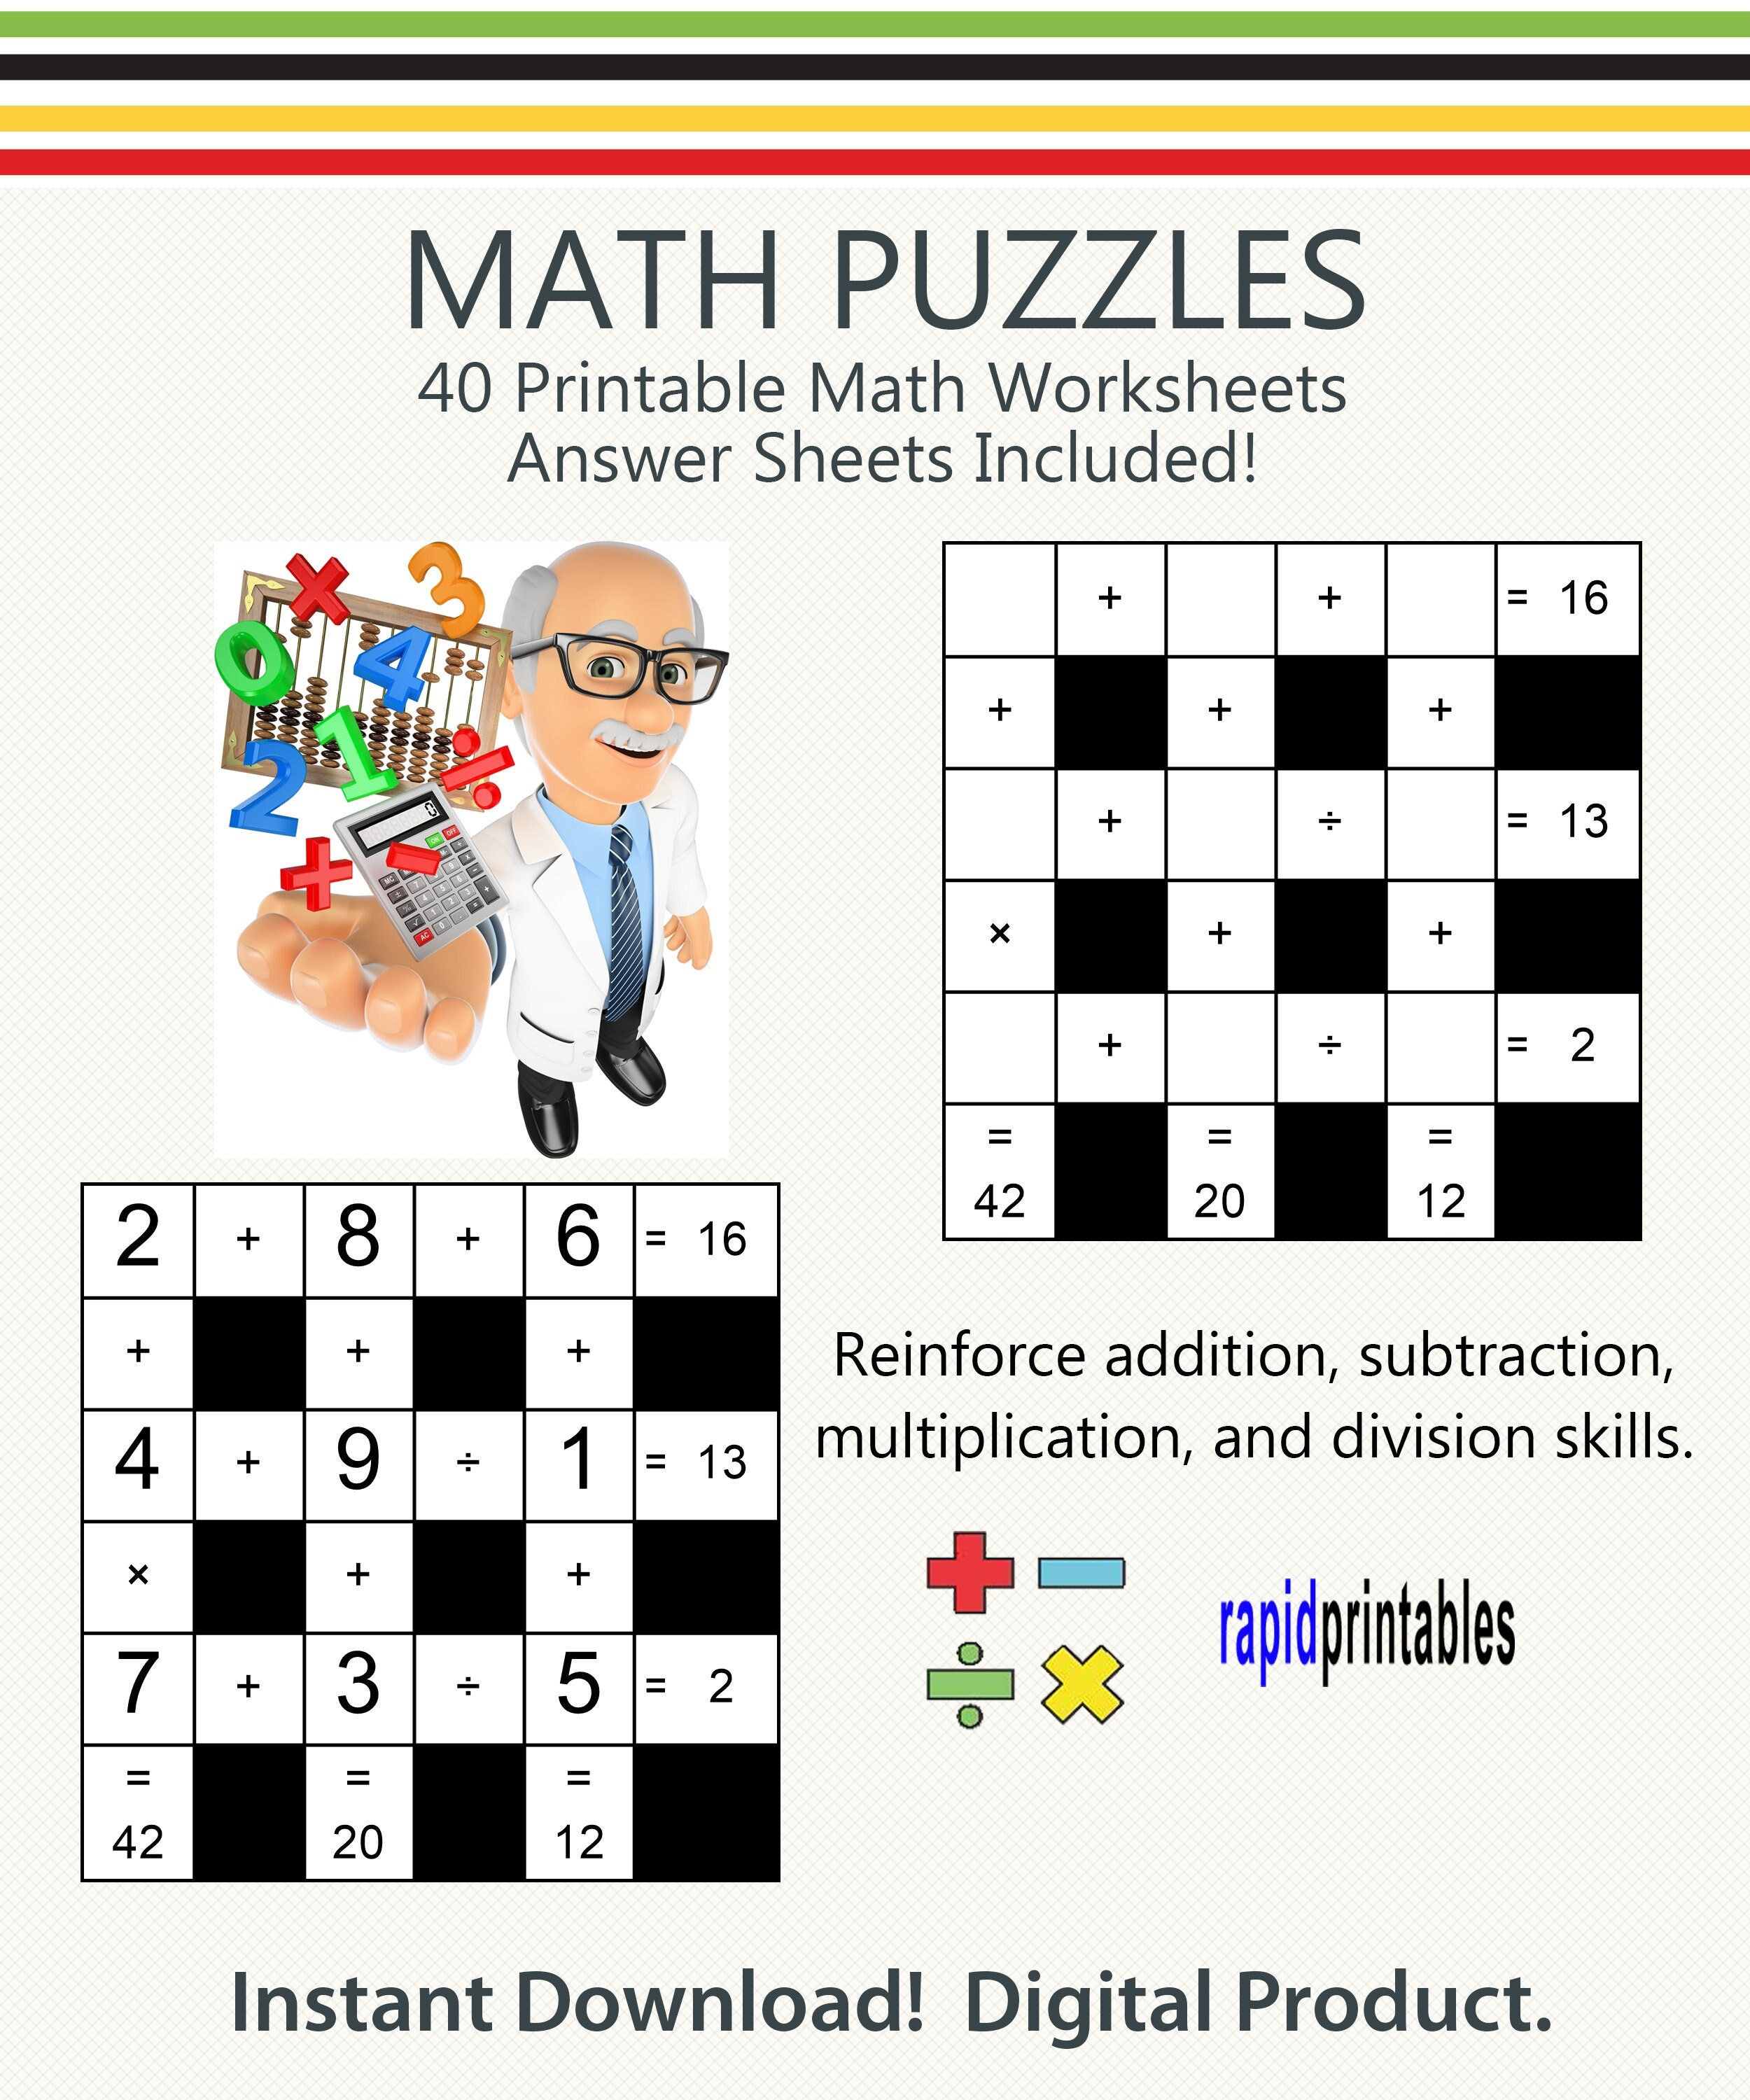 Free Math Puzzles Worksheets pdf printable | MATH ZONE FOR KIDS